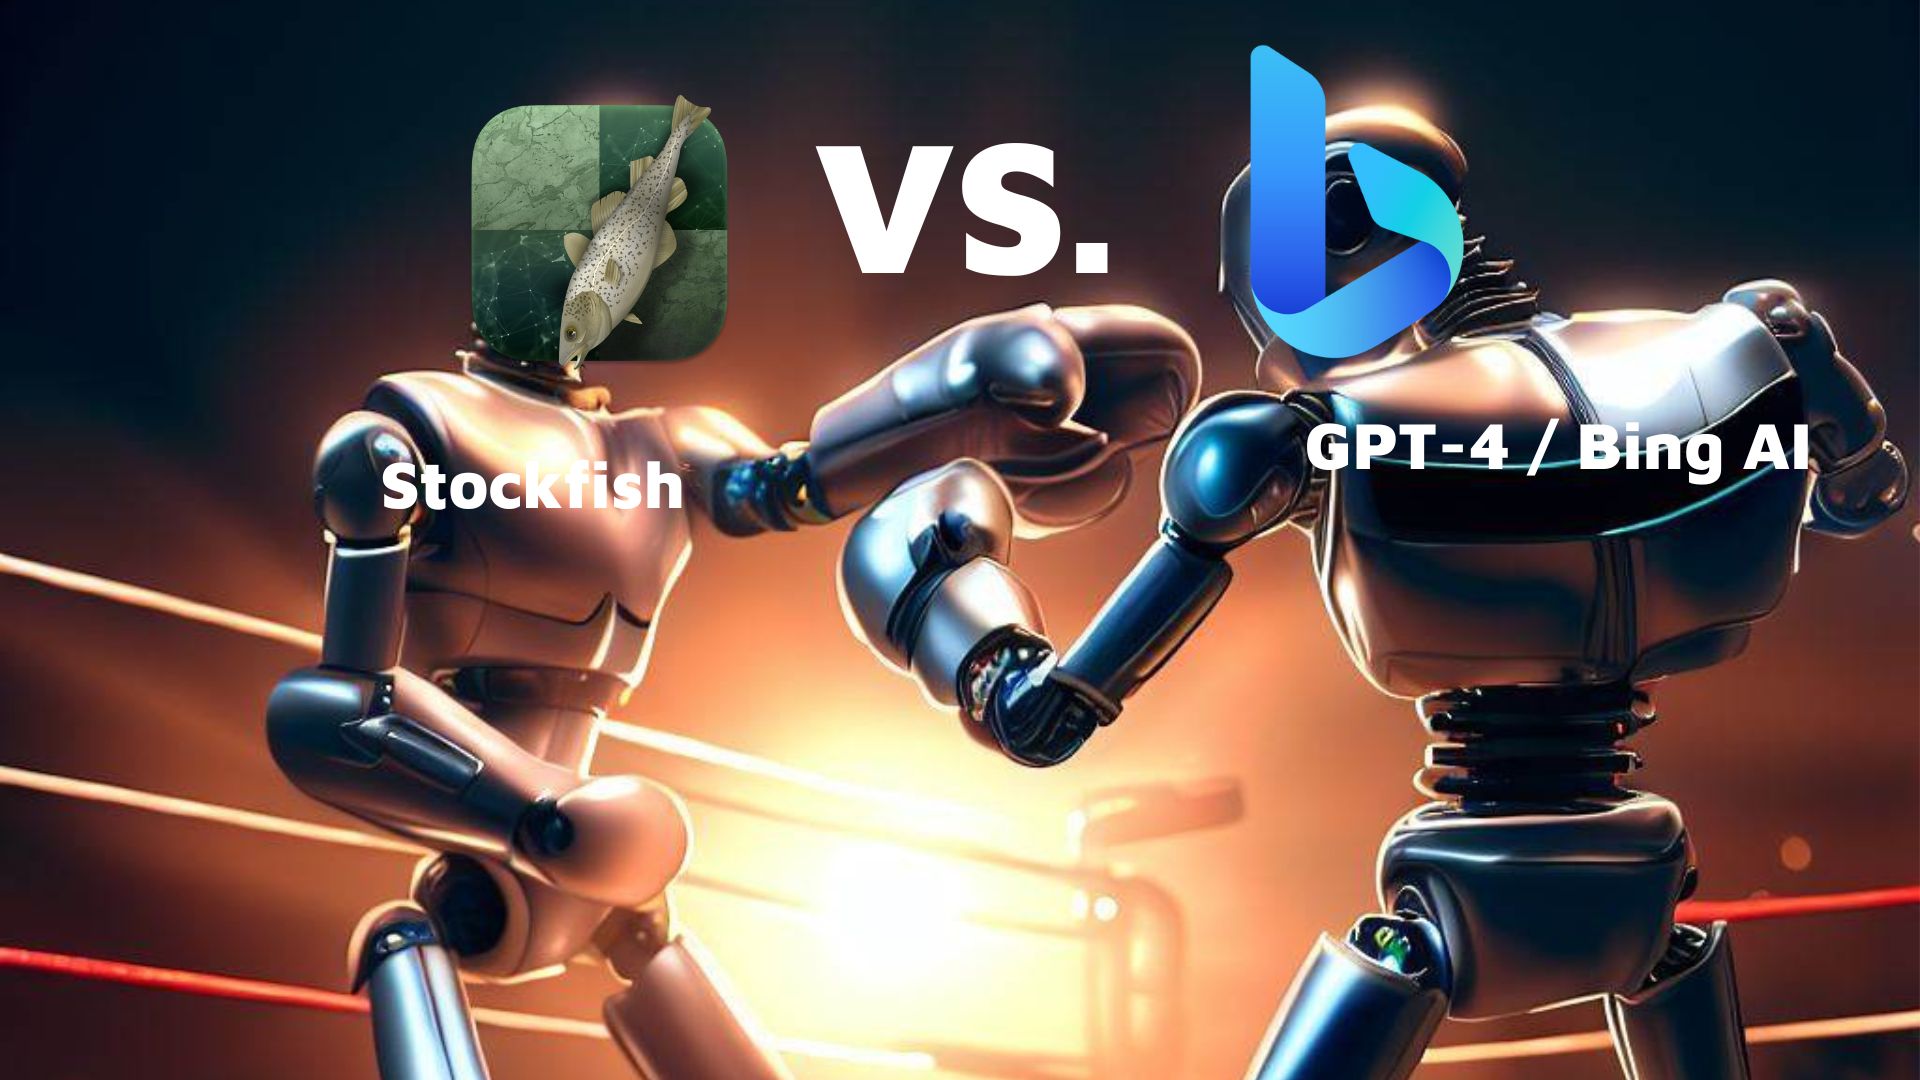 Stockfish vs. GTP-4 or Bing AI in a boxing ring